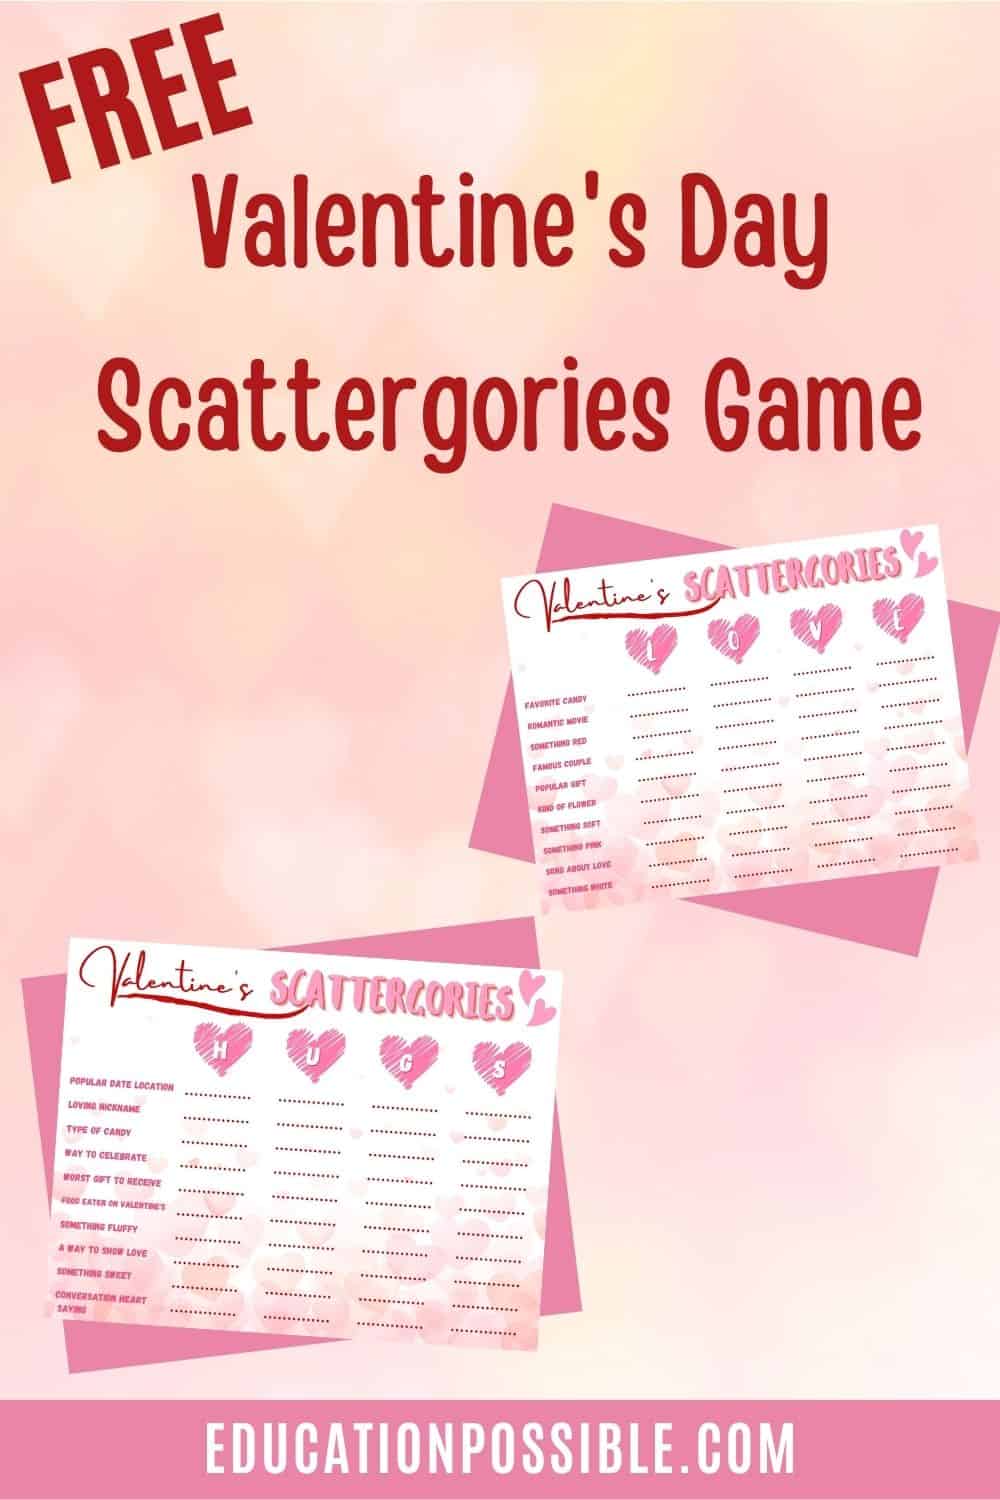 Have Fun Playing This Free Valentine’s Day Scattergories Game